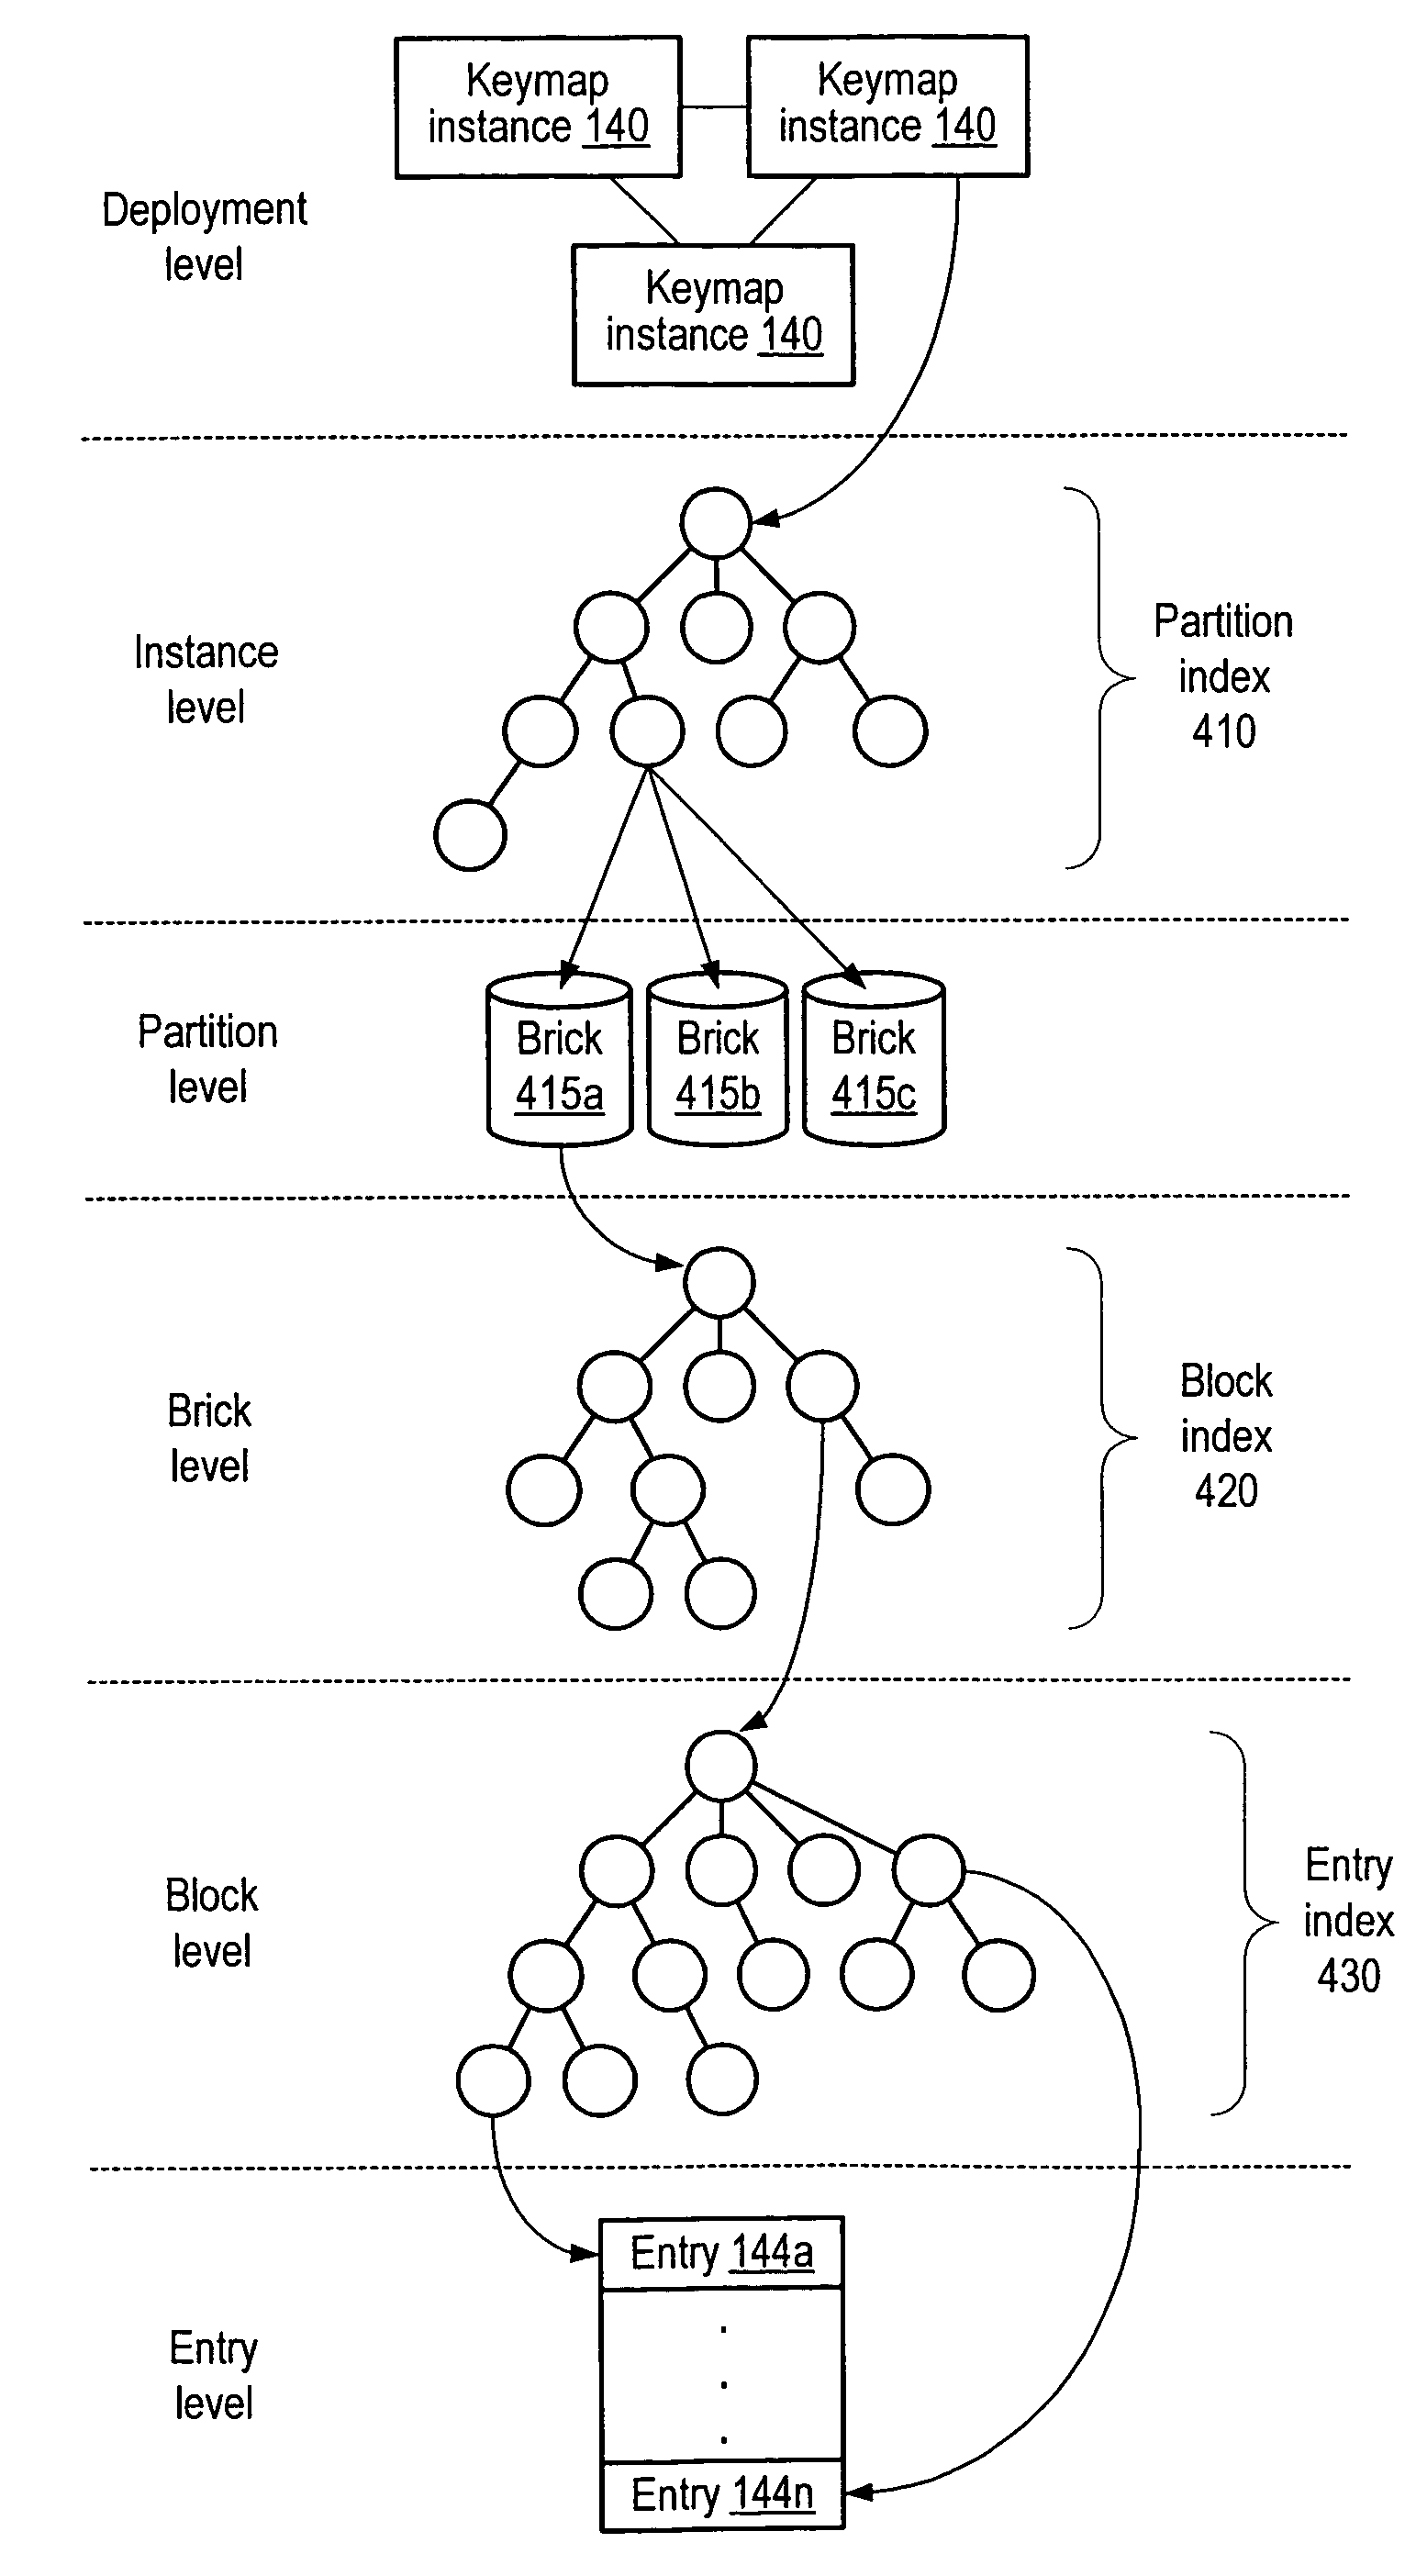 Distributed storage system with support for distinct storage classes